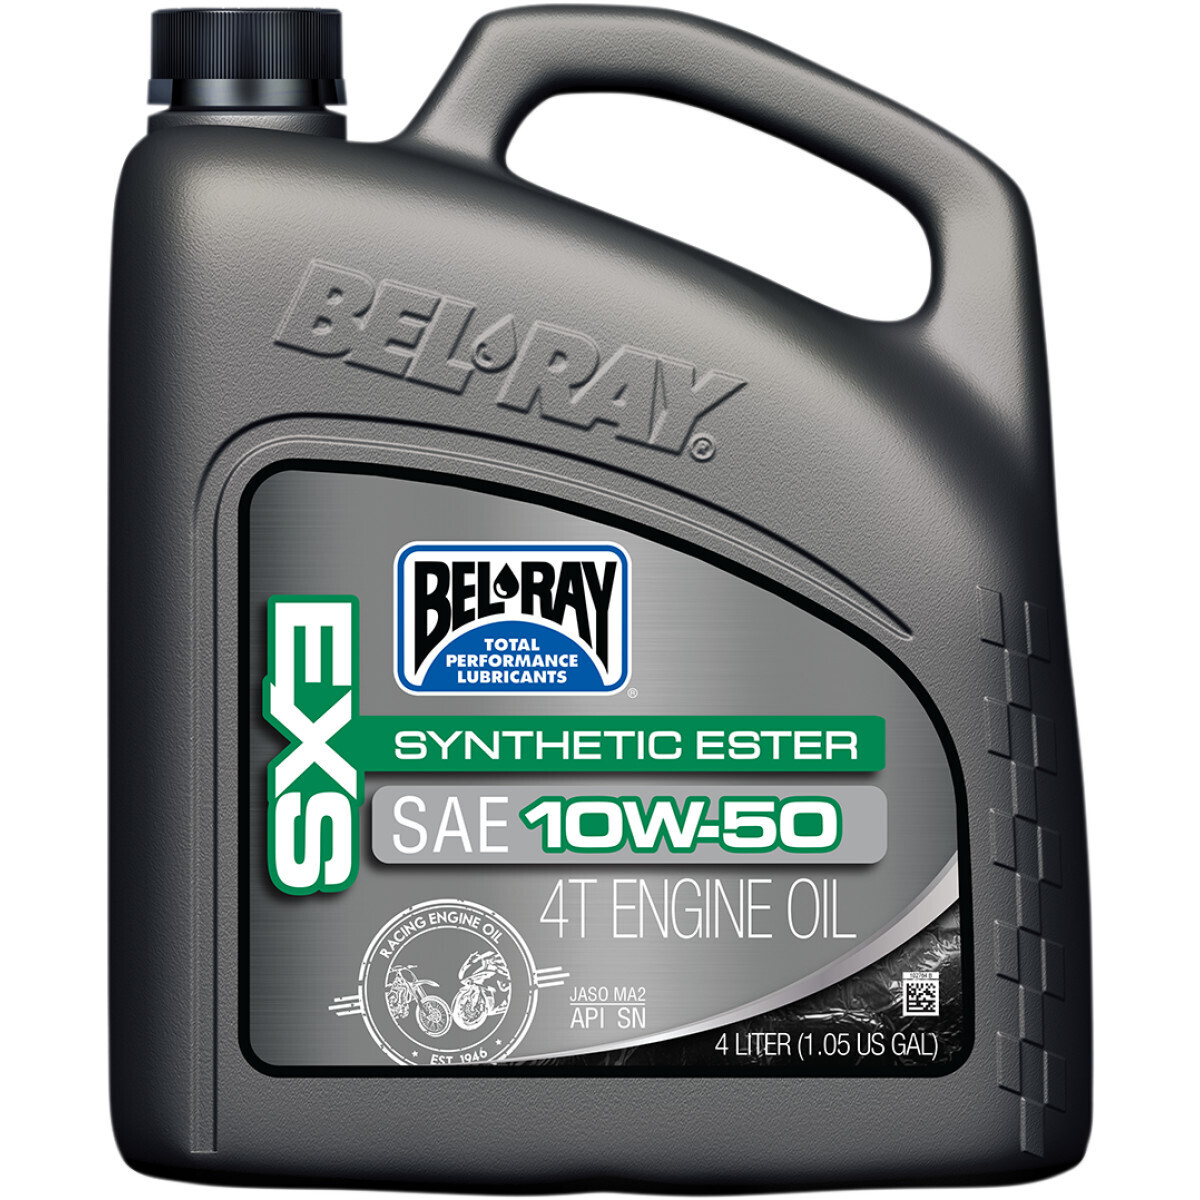 BEL-RAY
EXS SYNTHETIC ESTER 4-STROKE ENGINE OIL 10W-50 4 LITER